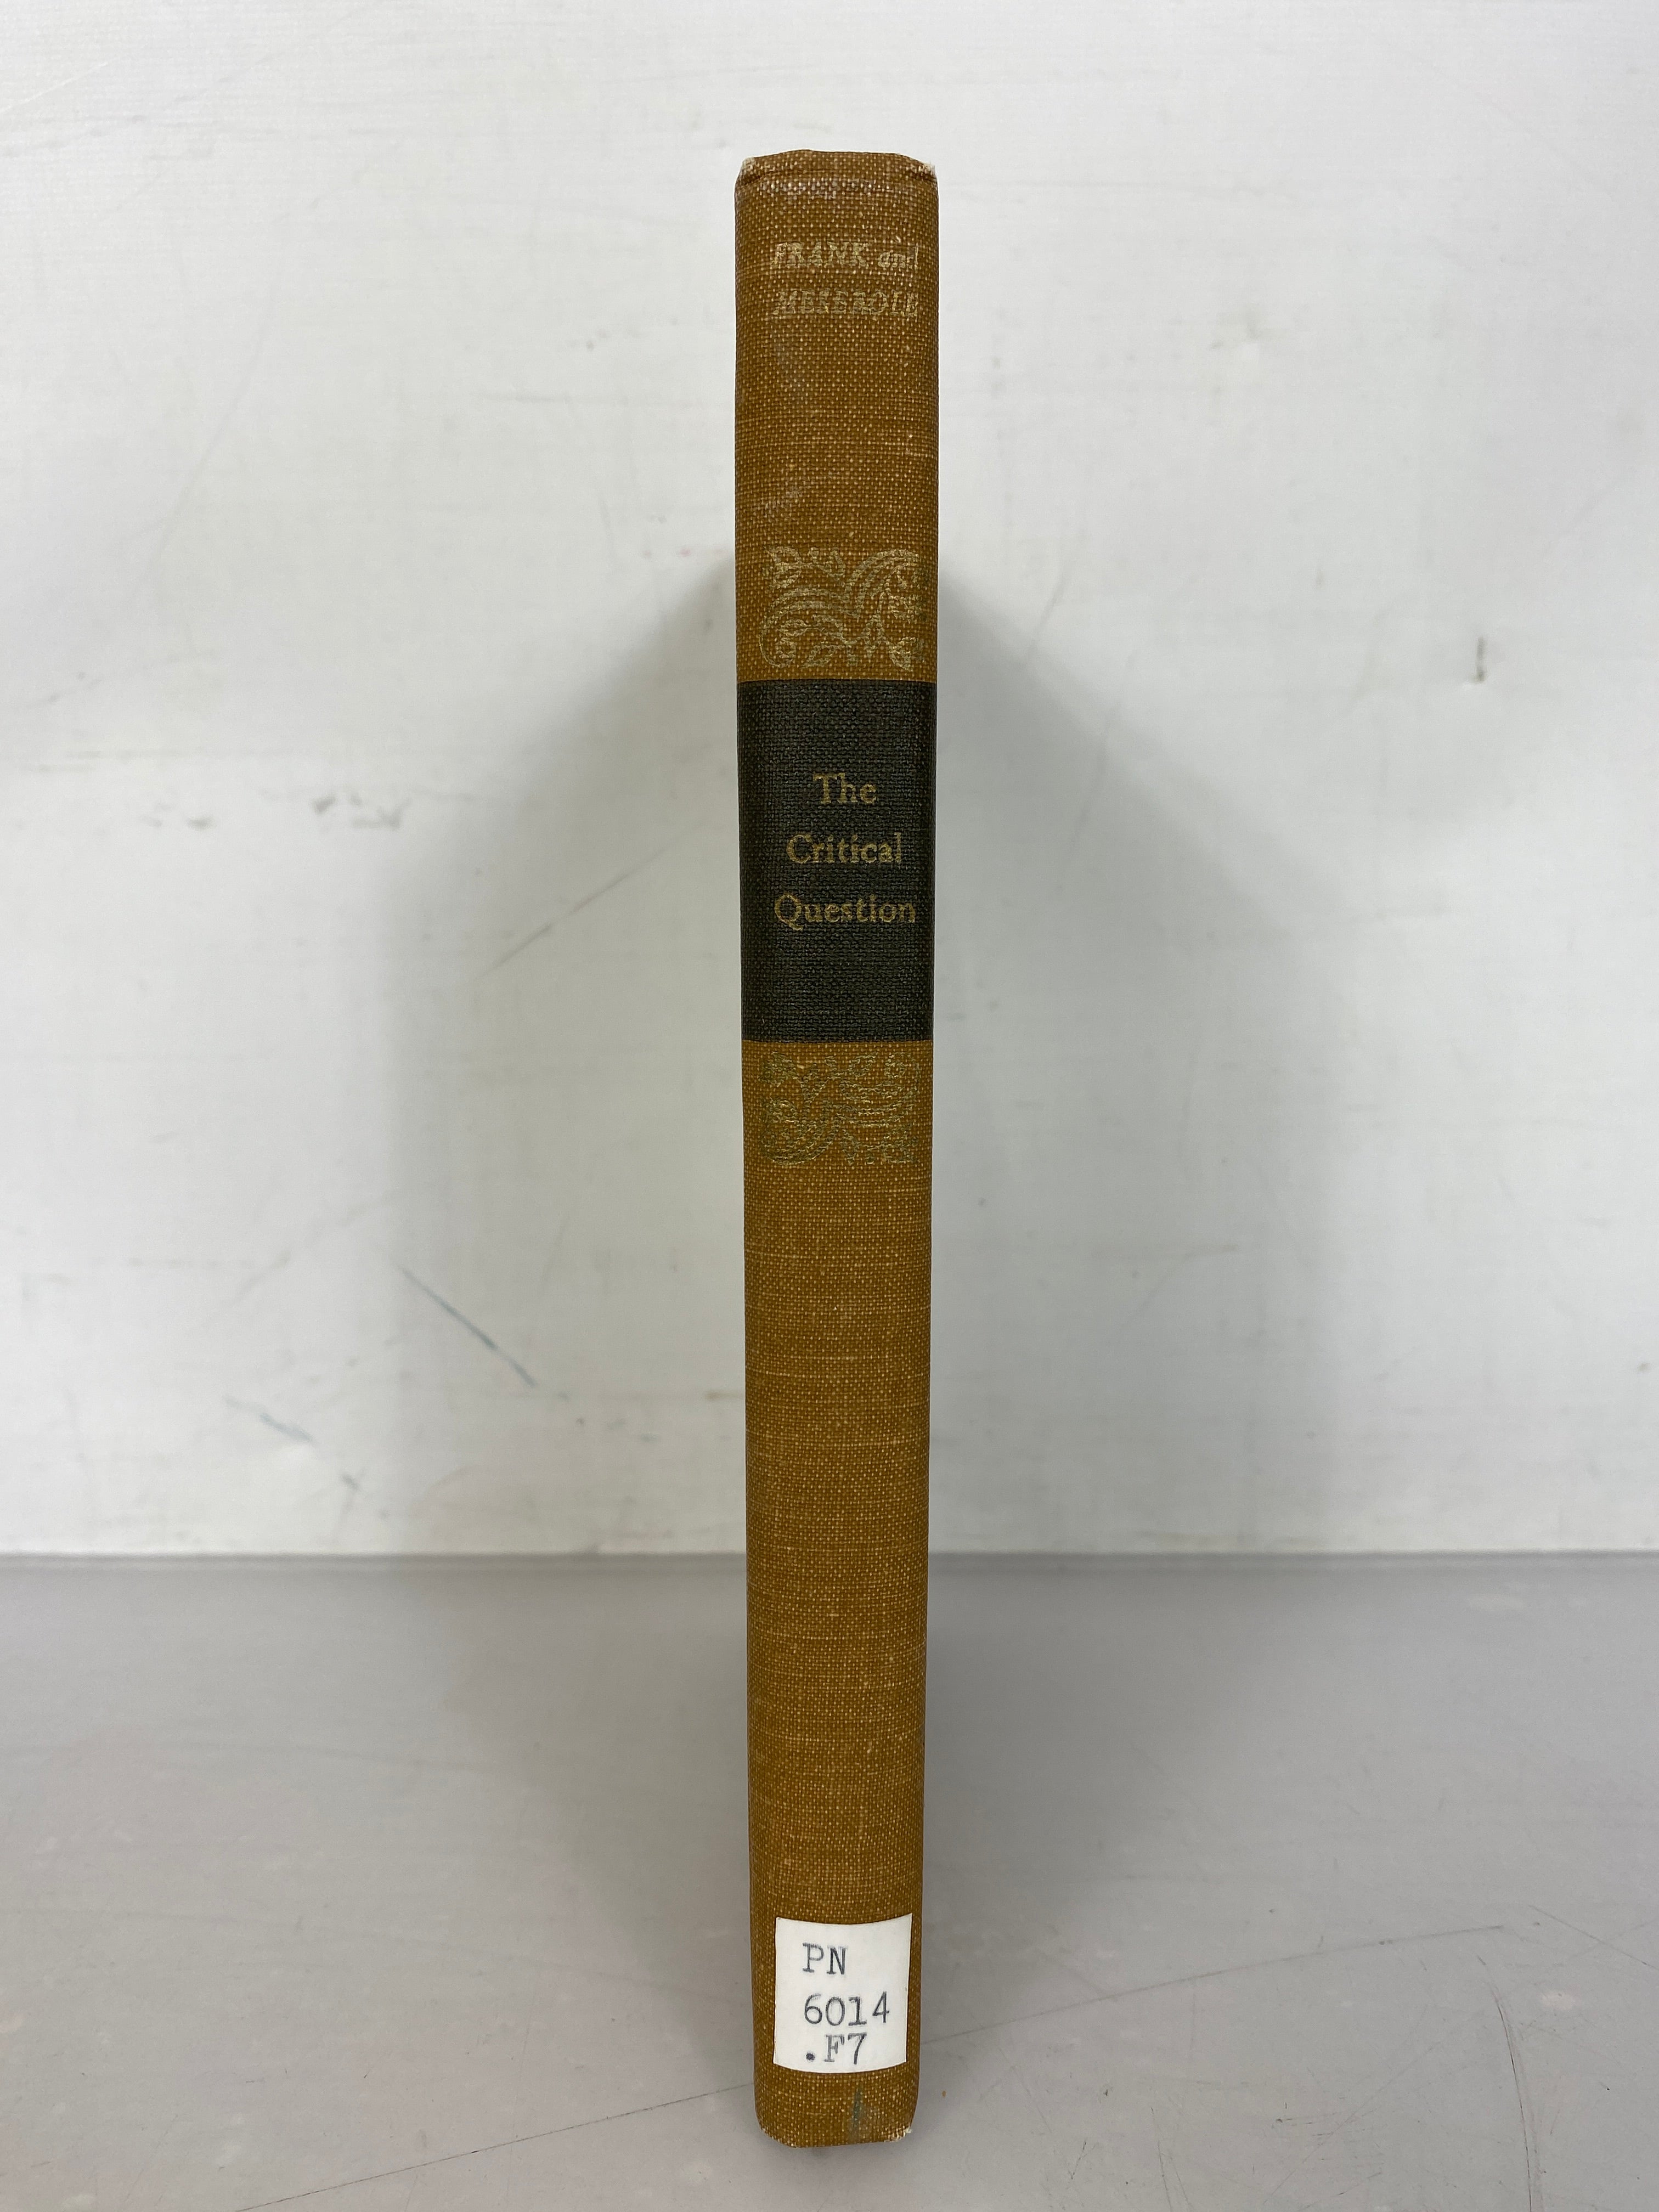 The Critical Question by Frank and Meserole Rare HC 1964